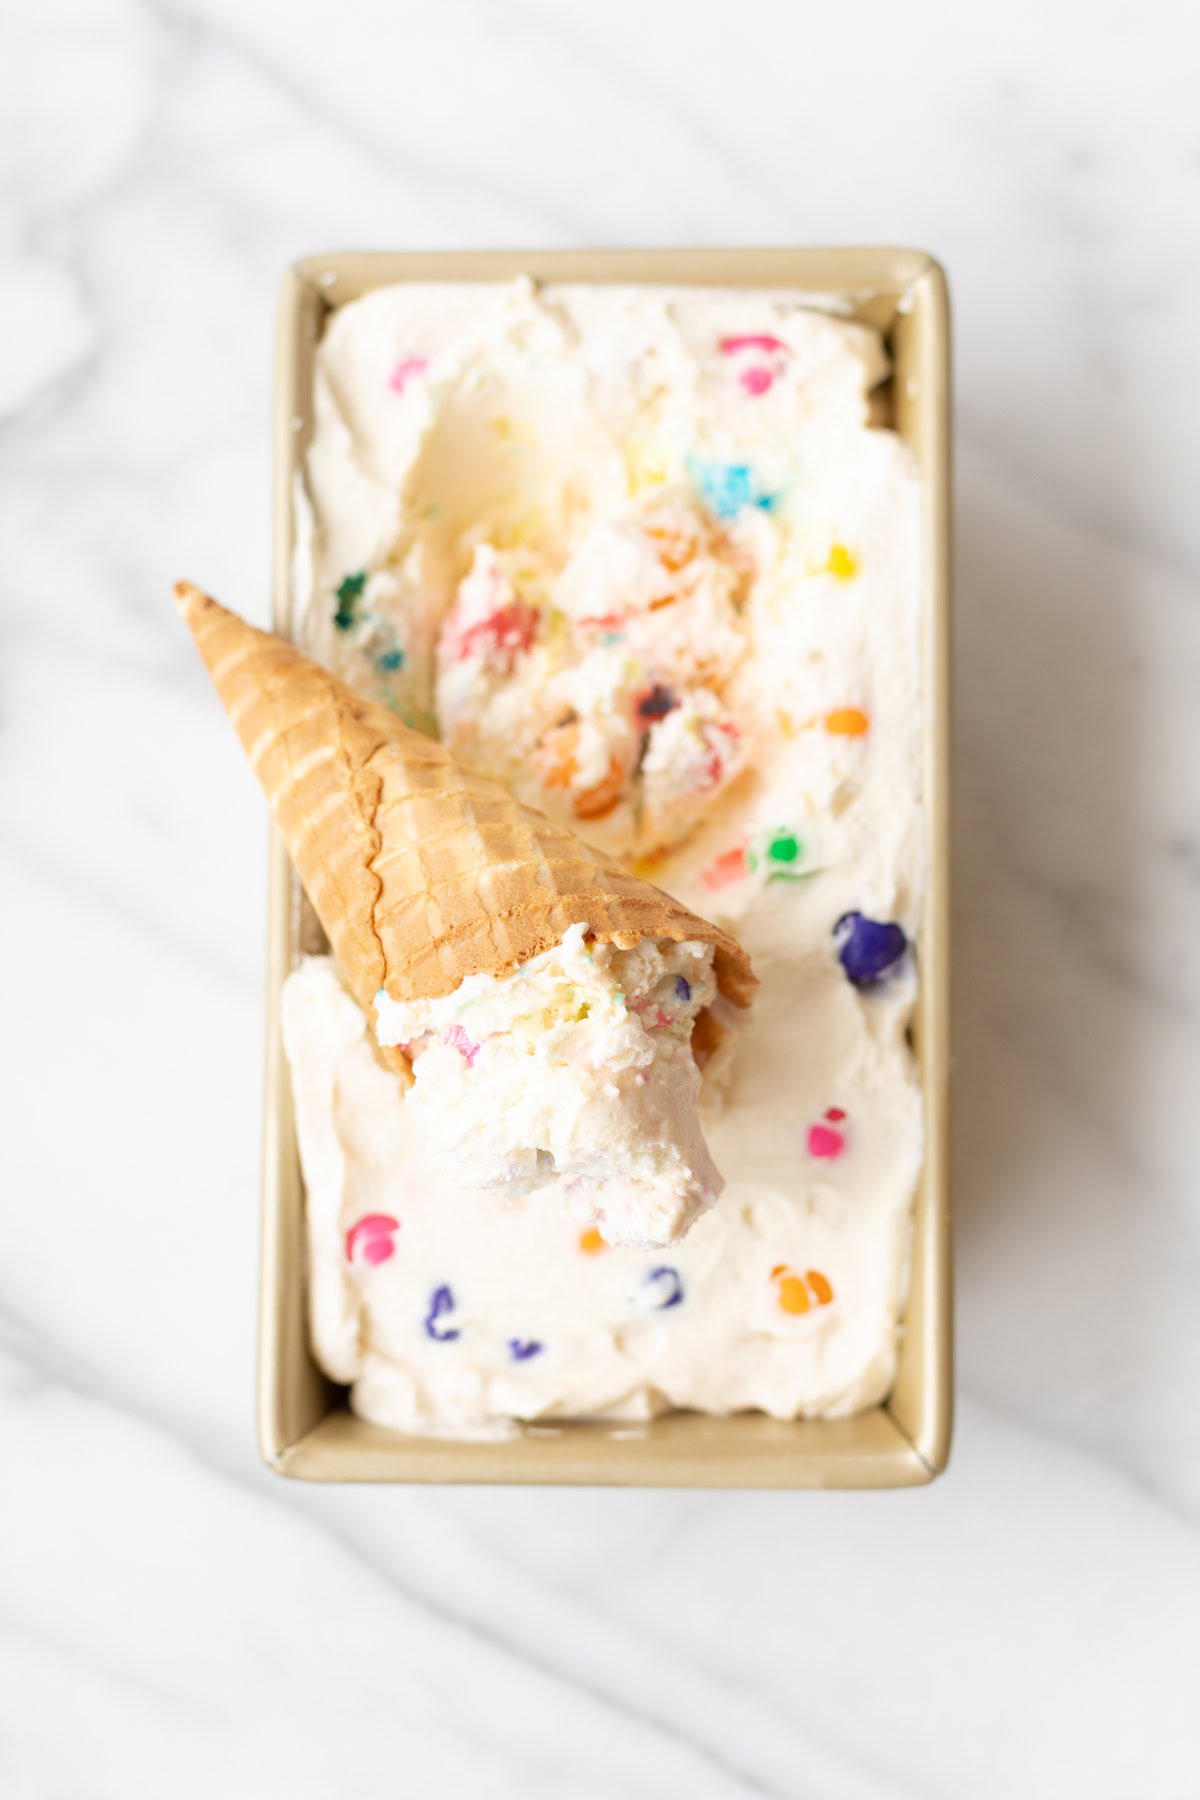 Rectangular tray of bubble gum ice cream with colorful sprinkles and an inverted ice cream cone placed on top, resting on a marble surface.